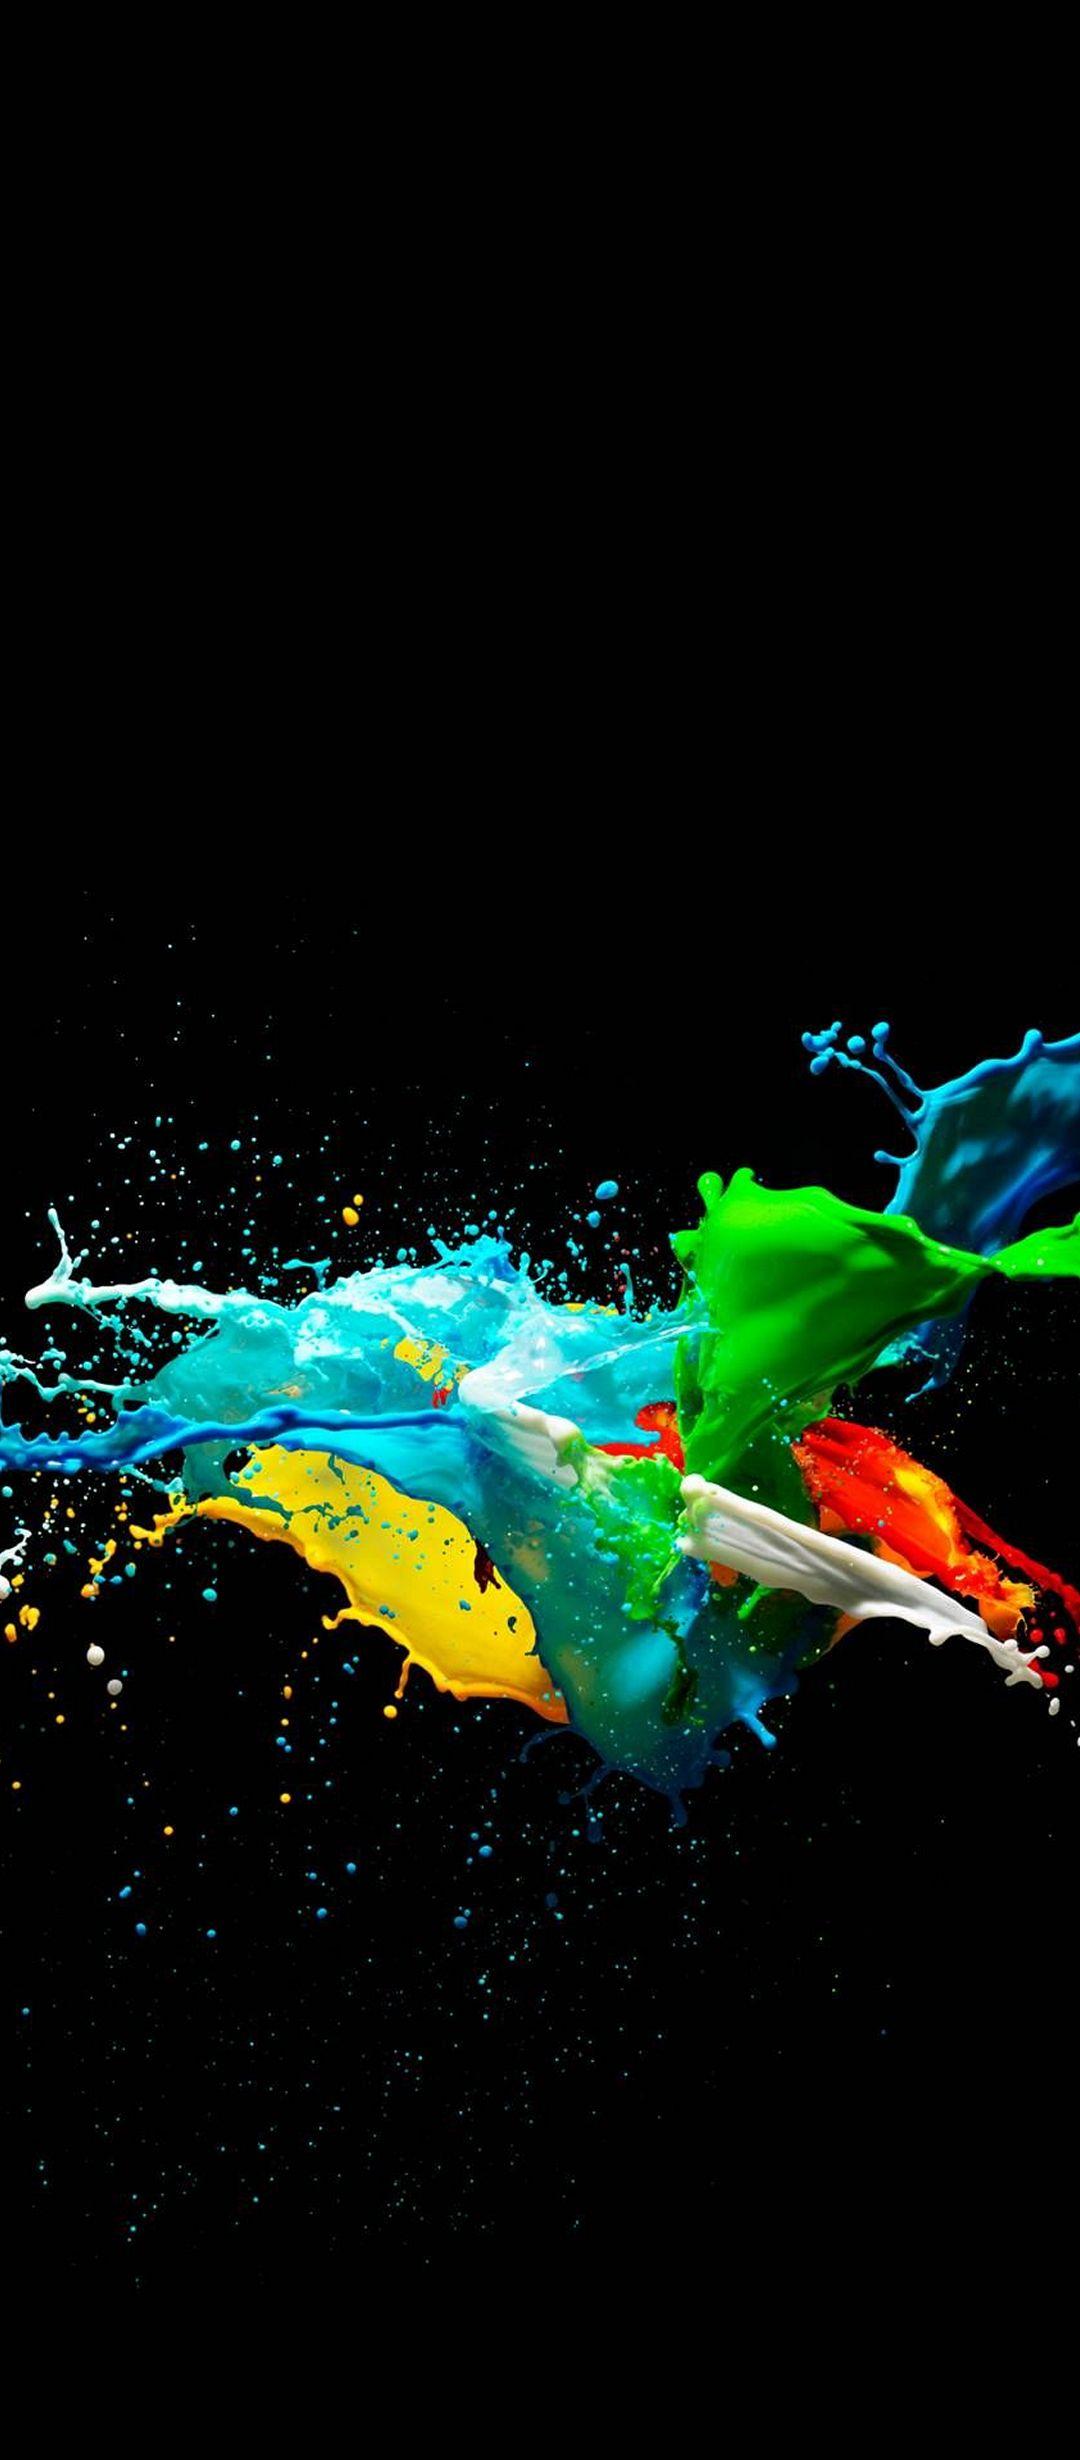 Colorful Painted Black Backgrounds